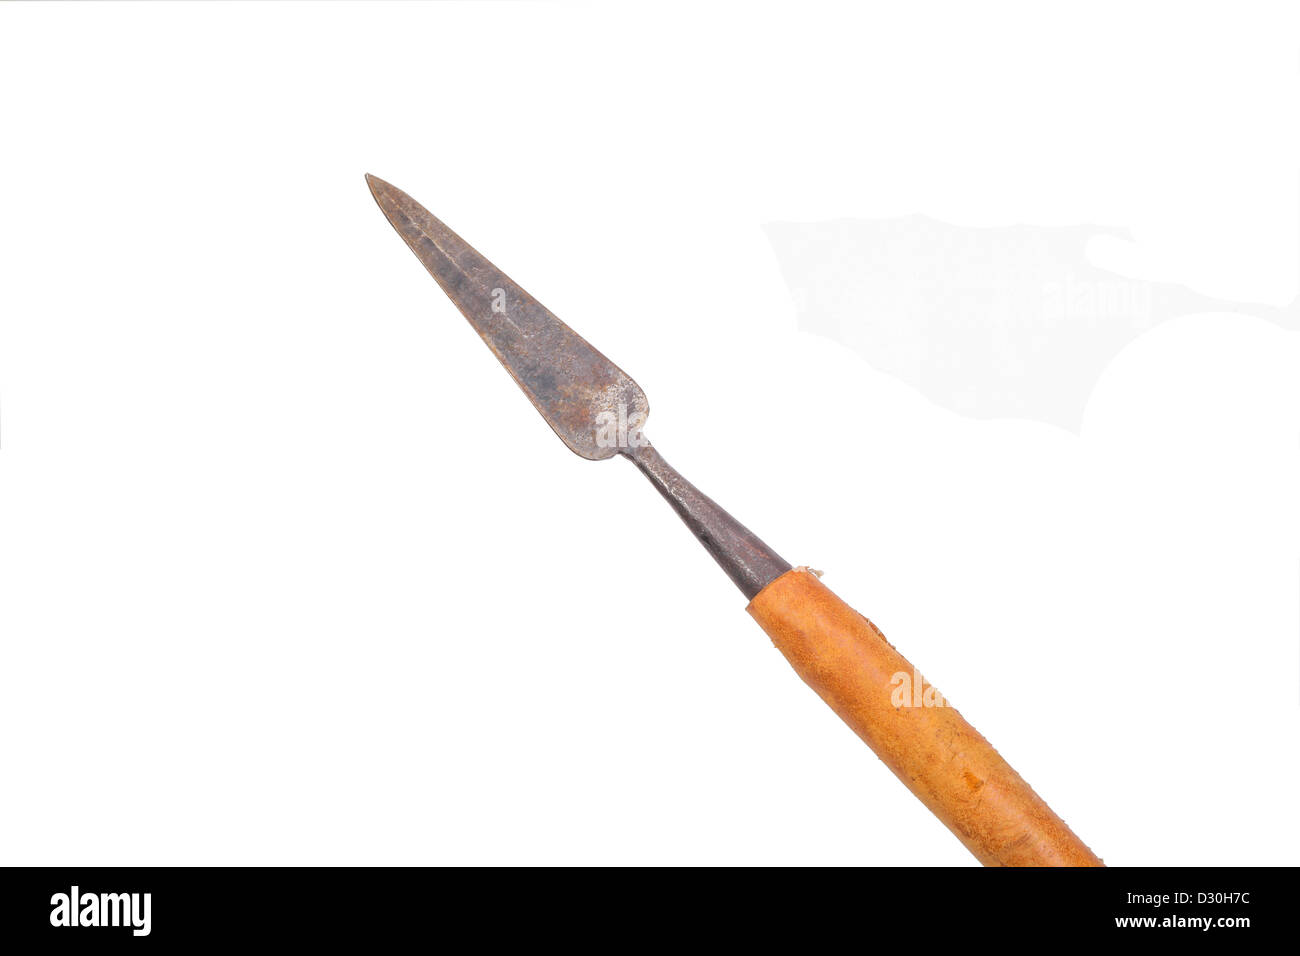 Simple iron medieval spear with leather bindings on white background Stock Photo